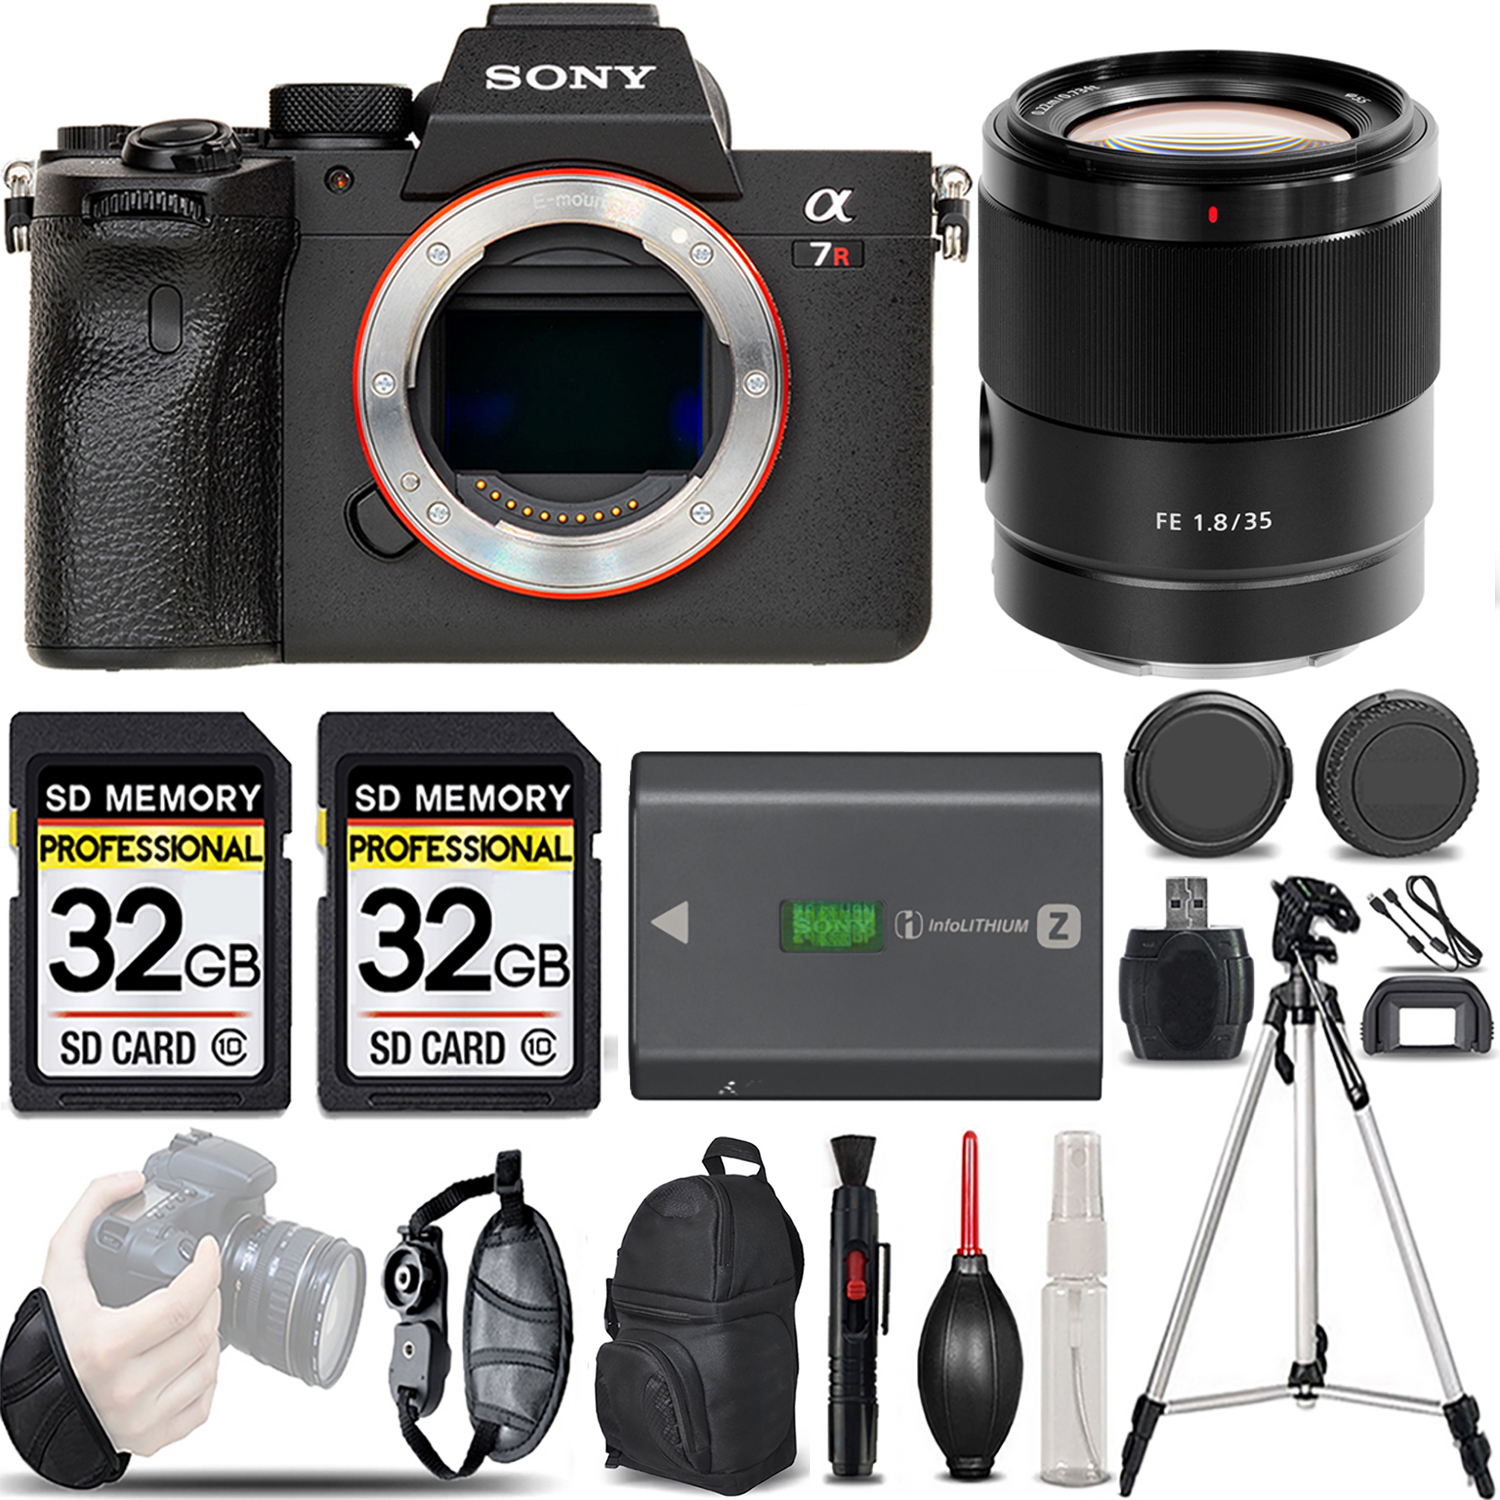 a7R IVA Mirrorless Camera + 35mm Lens + Extra Battery + Bag + 64Gb & More! *FREE SHIPPING*